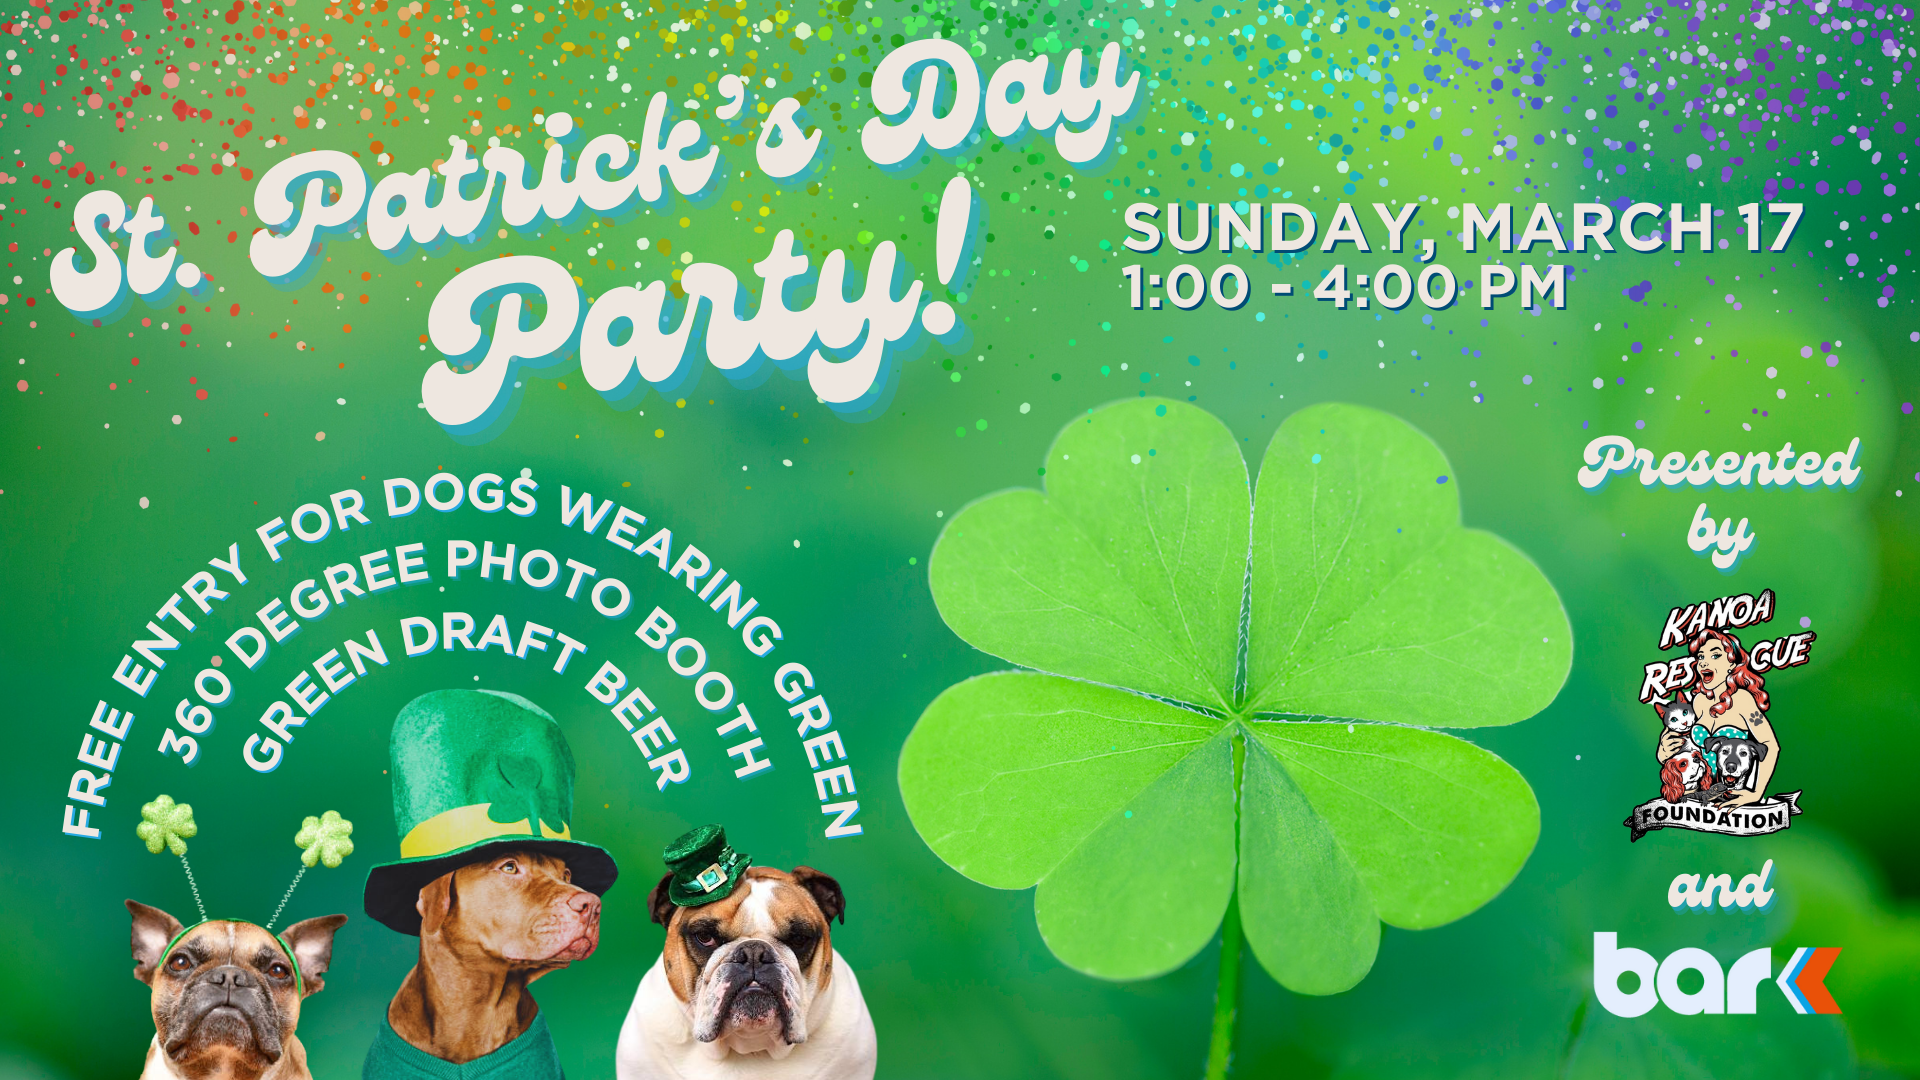 St. Patrick's day party. Free entry for dogs wearing green, 360 degree photo booth, and green draft beer. Sunday March 17th from 1 to 4 pm. Presented by Kanoa Rescue Foundation and Bar K.